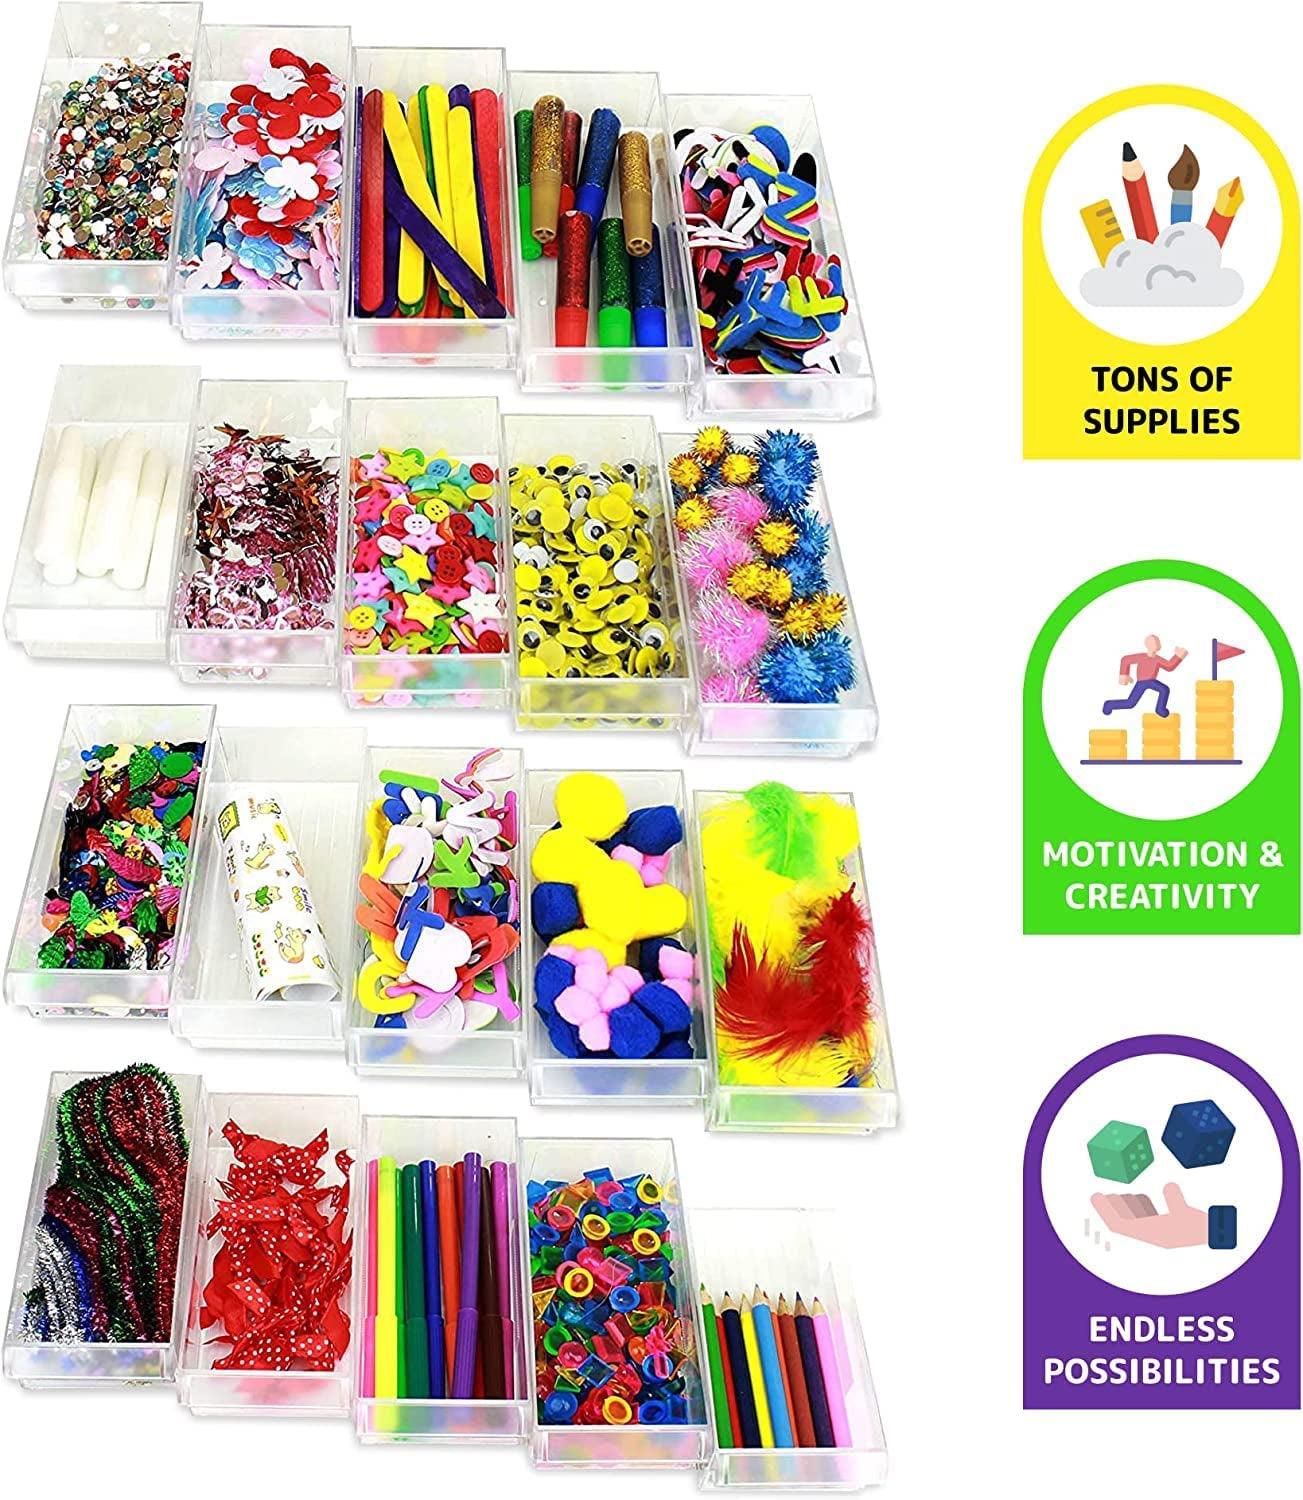 Arts & Crafts Supplies Center for Kids Craft Supplies Kit Complete 20 Filled Drawers of Craft Materials - WoodArtSupply